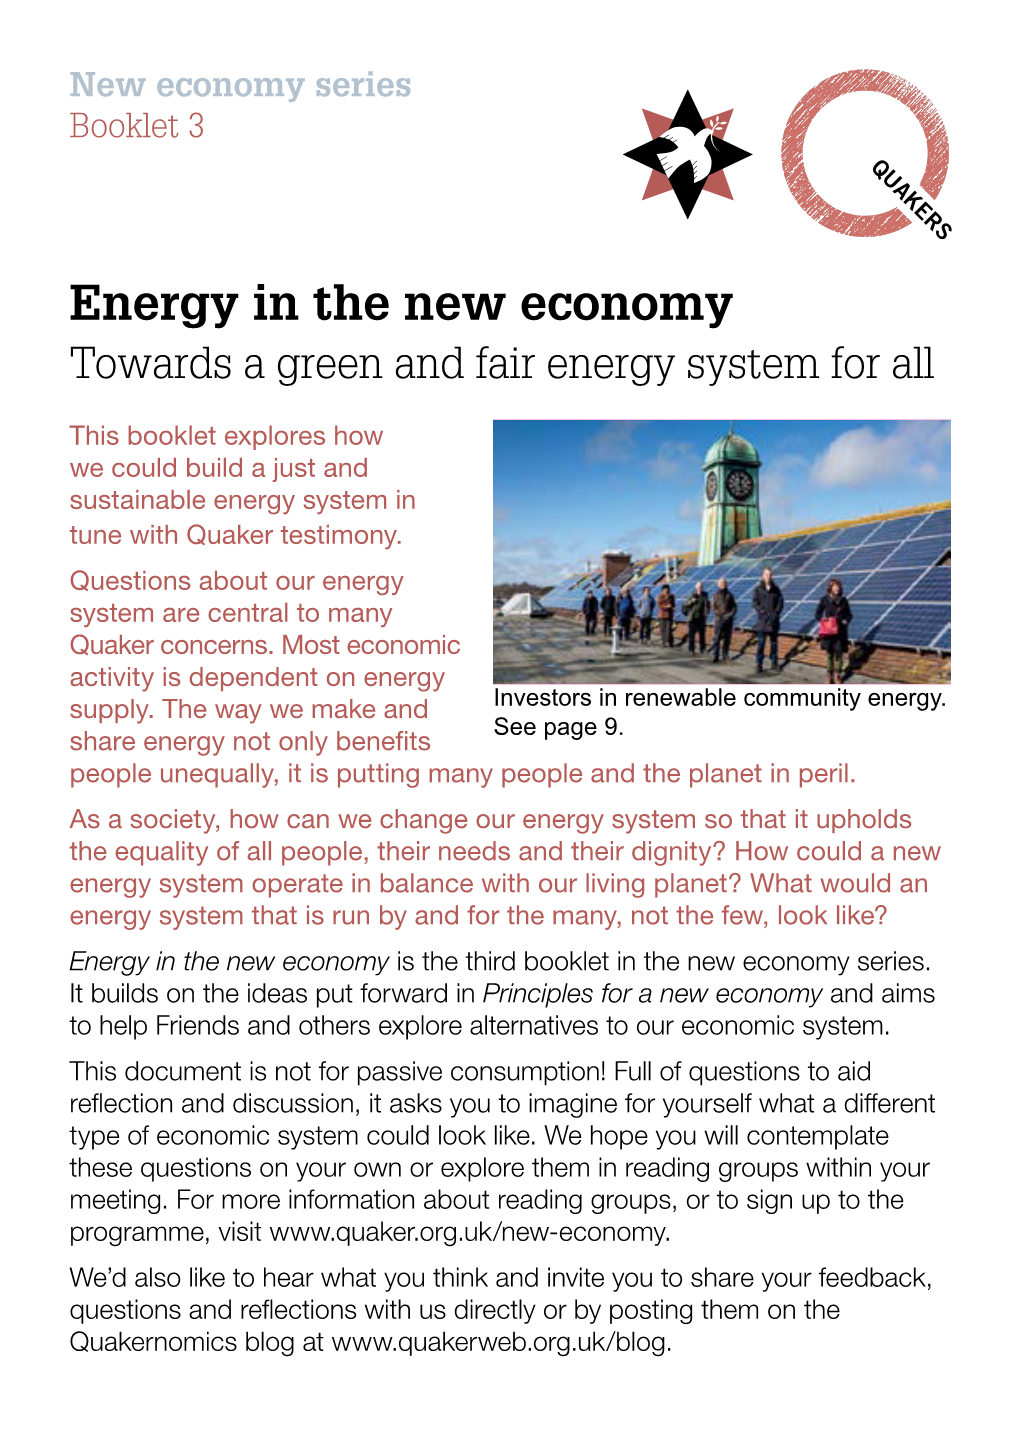 Energy in the New Economy Towards a Green and Fair Energy System for All